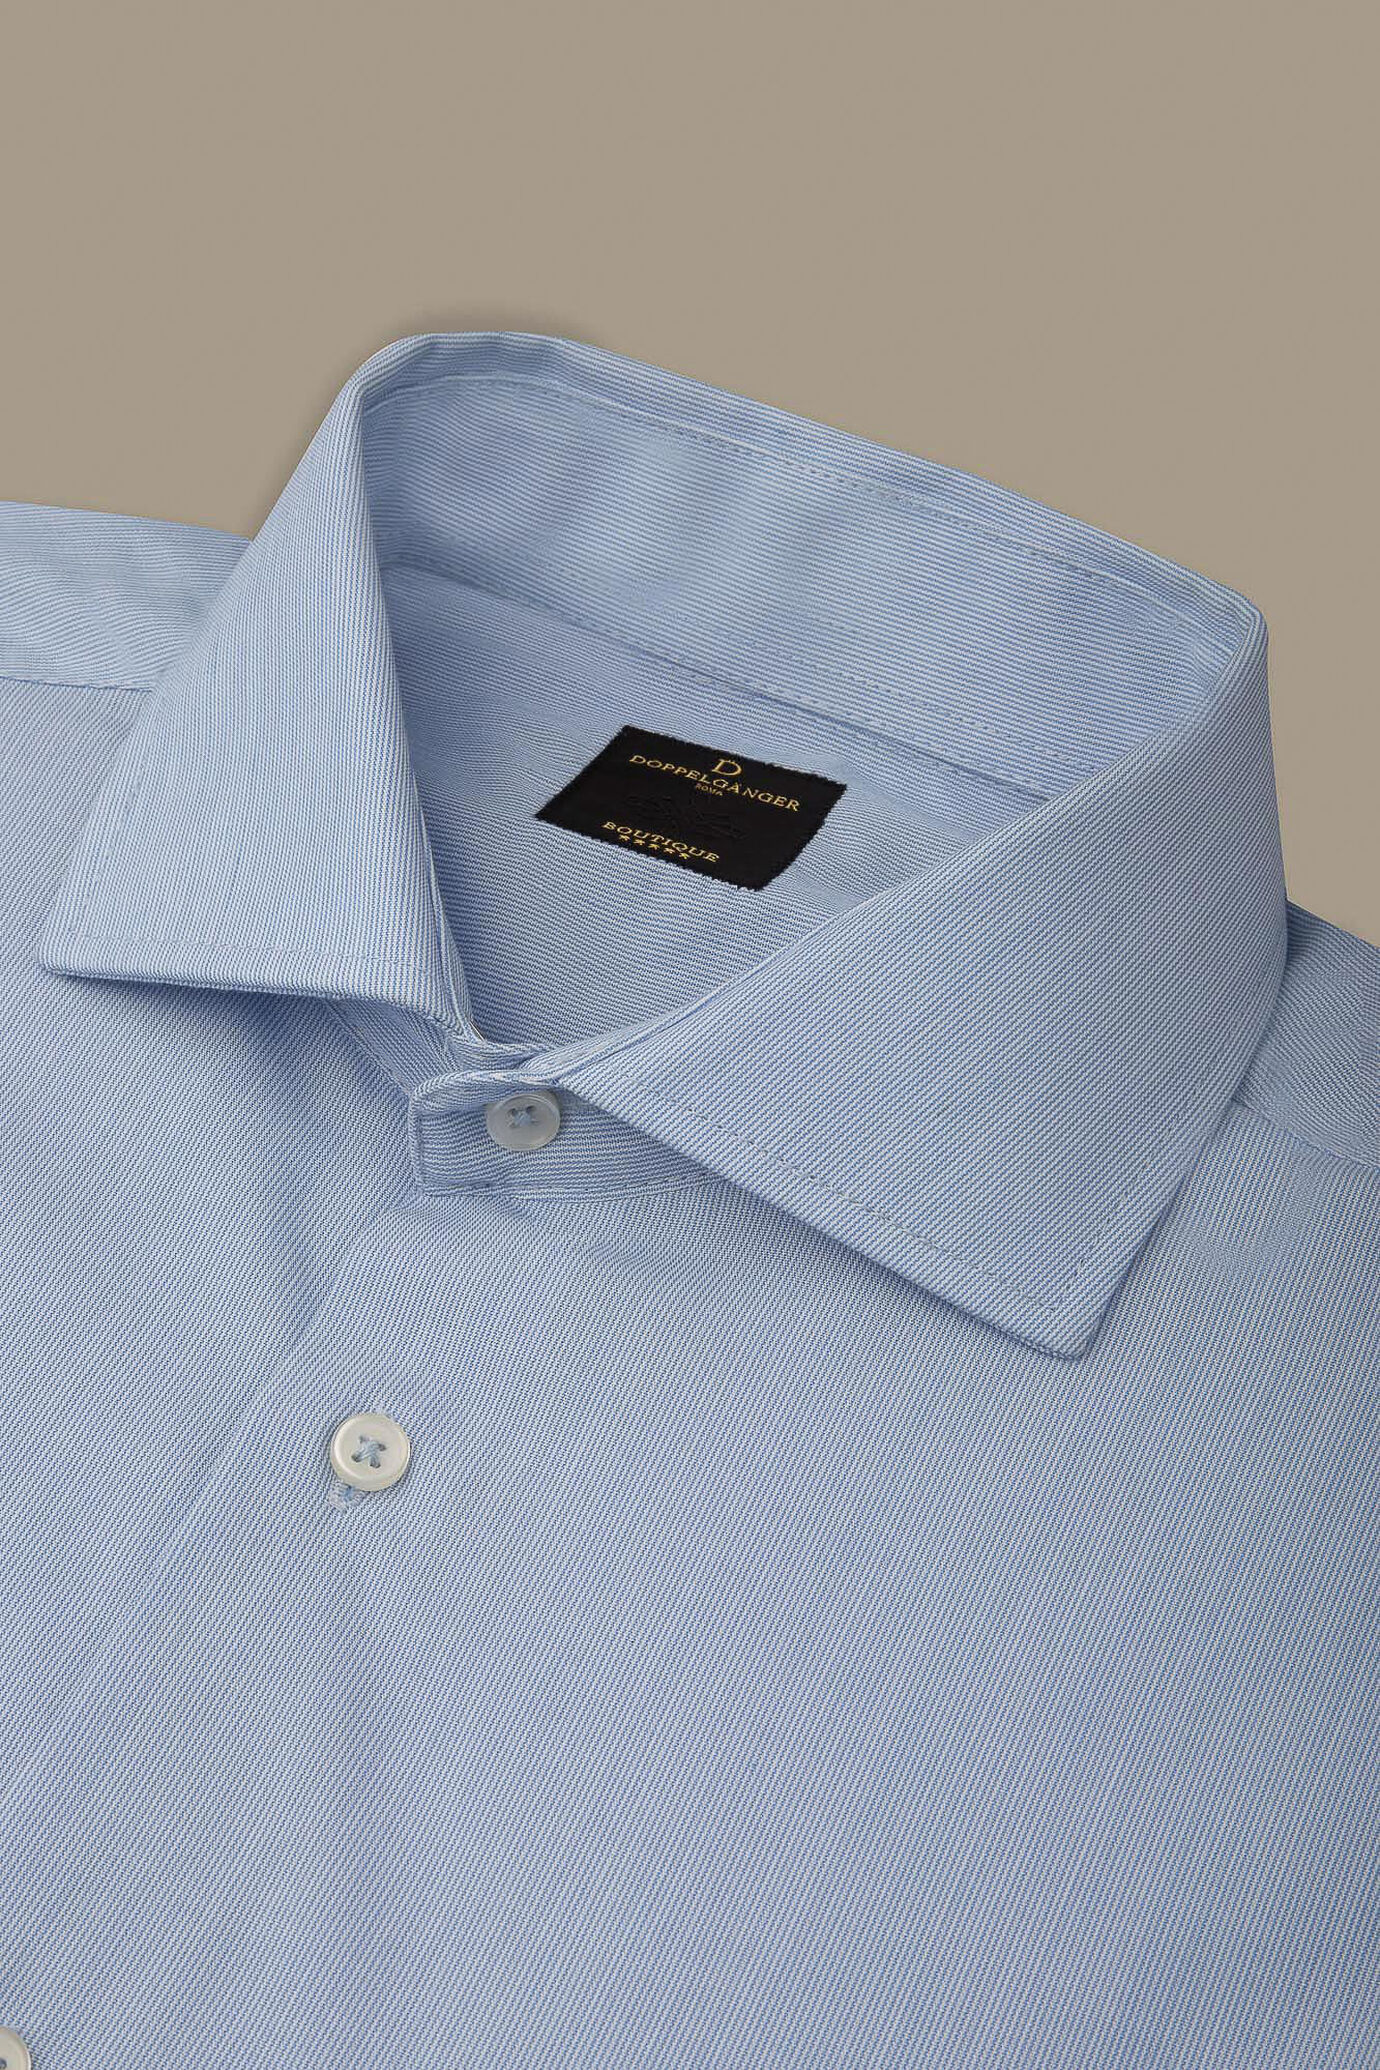 French collar classic shirt image number 1